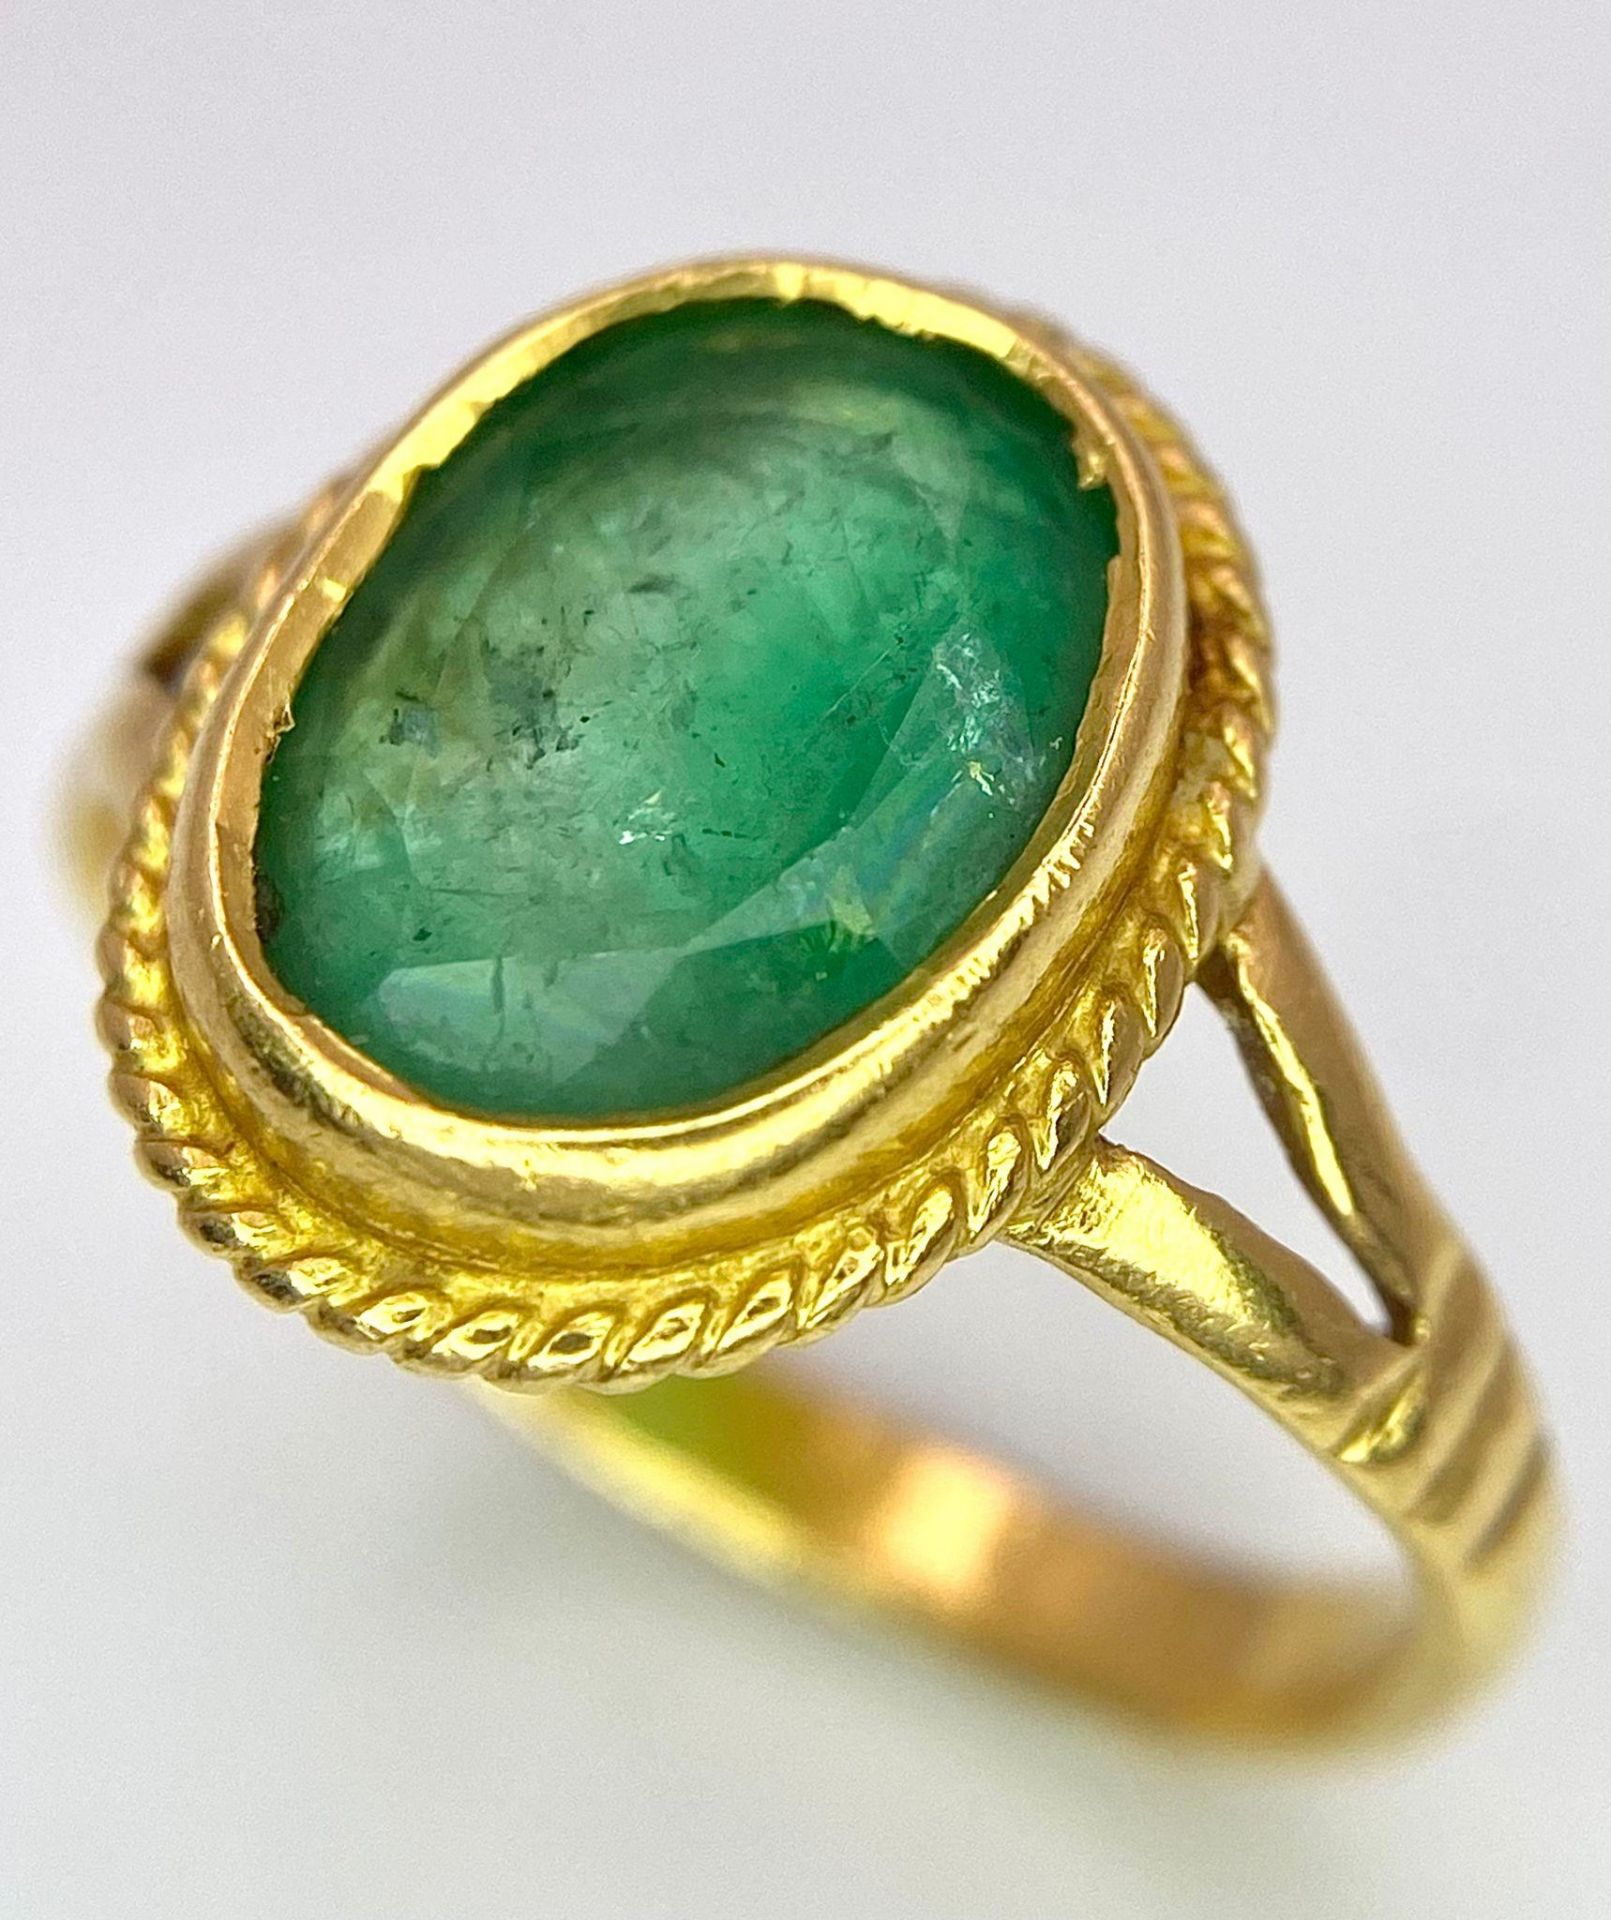 A 21K (tested) Green Emerald Ring. Central oval cut emerald. Size H. 3.15g weight.